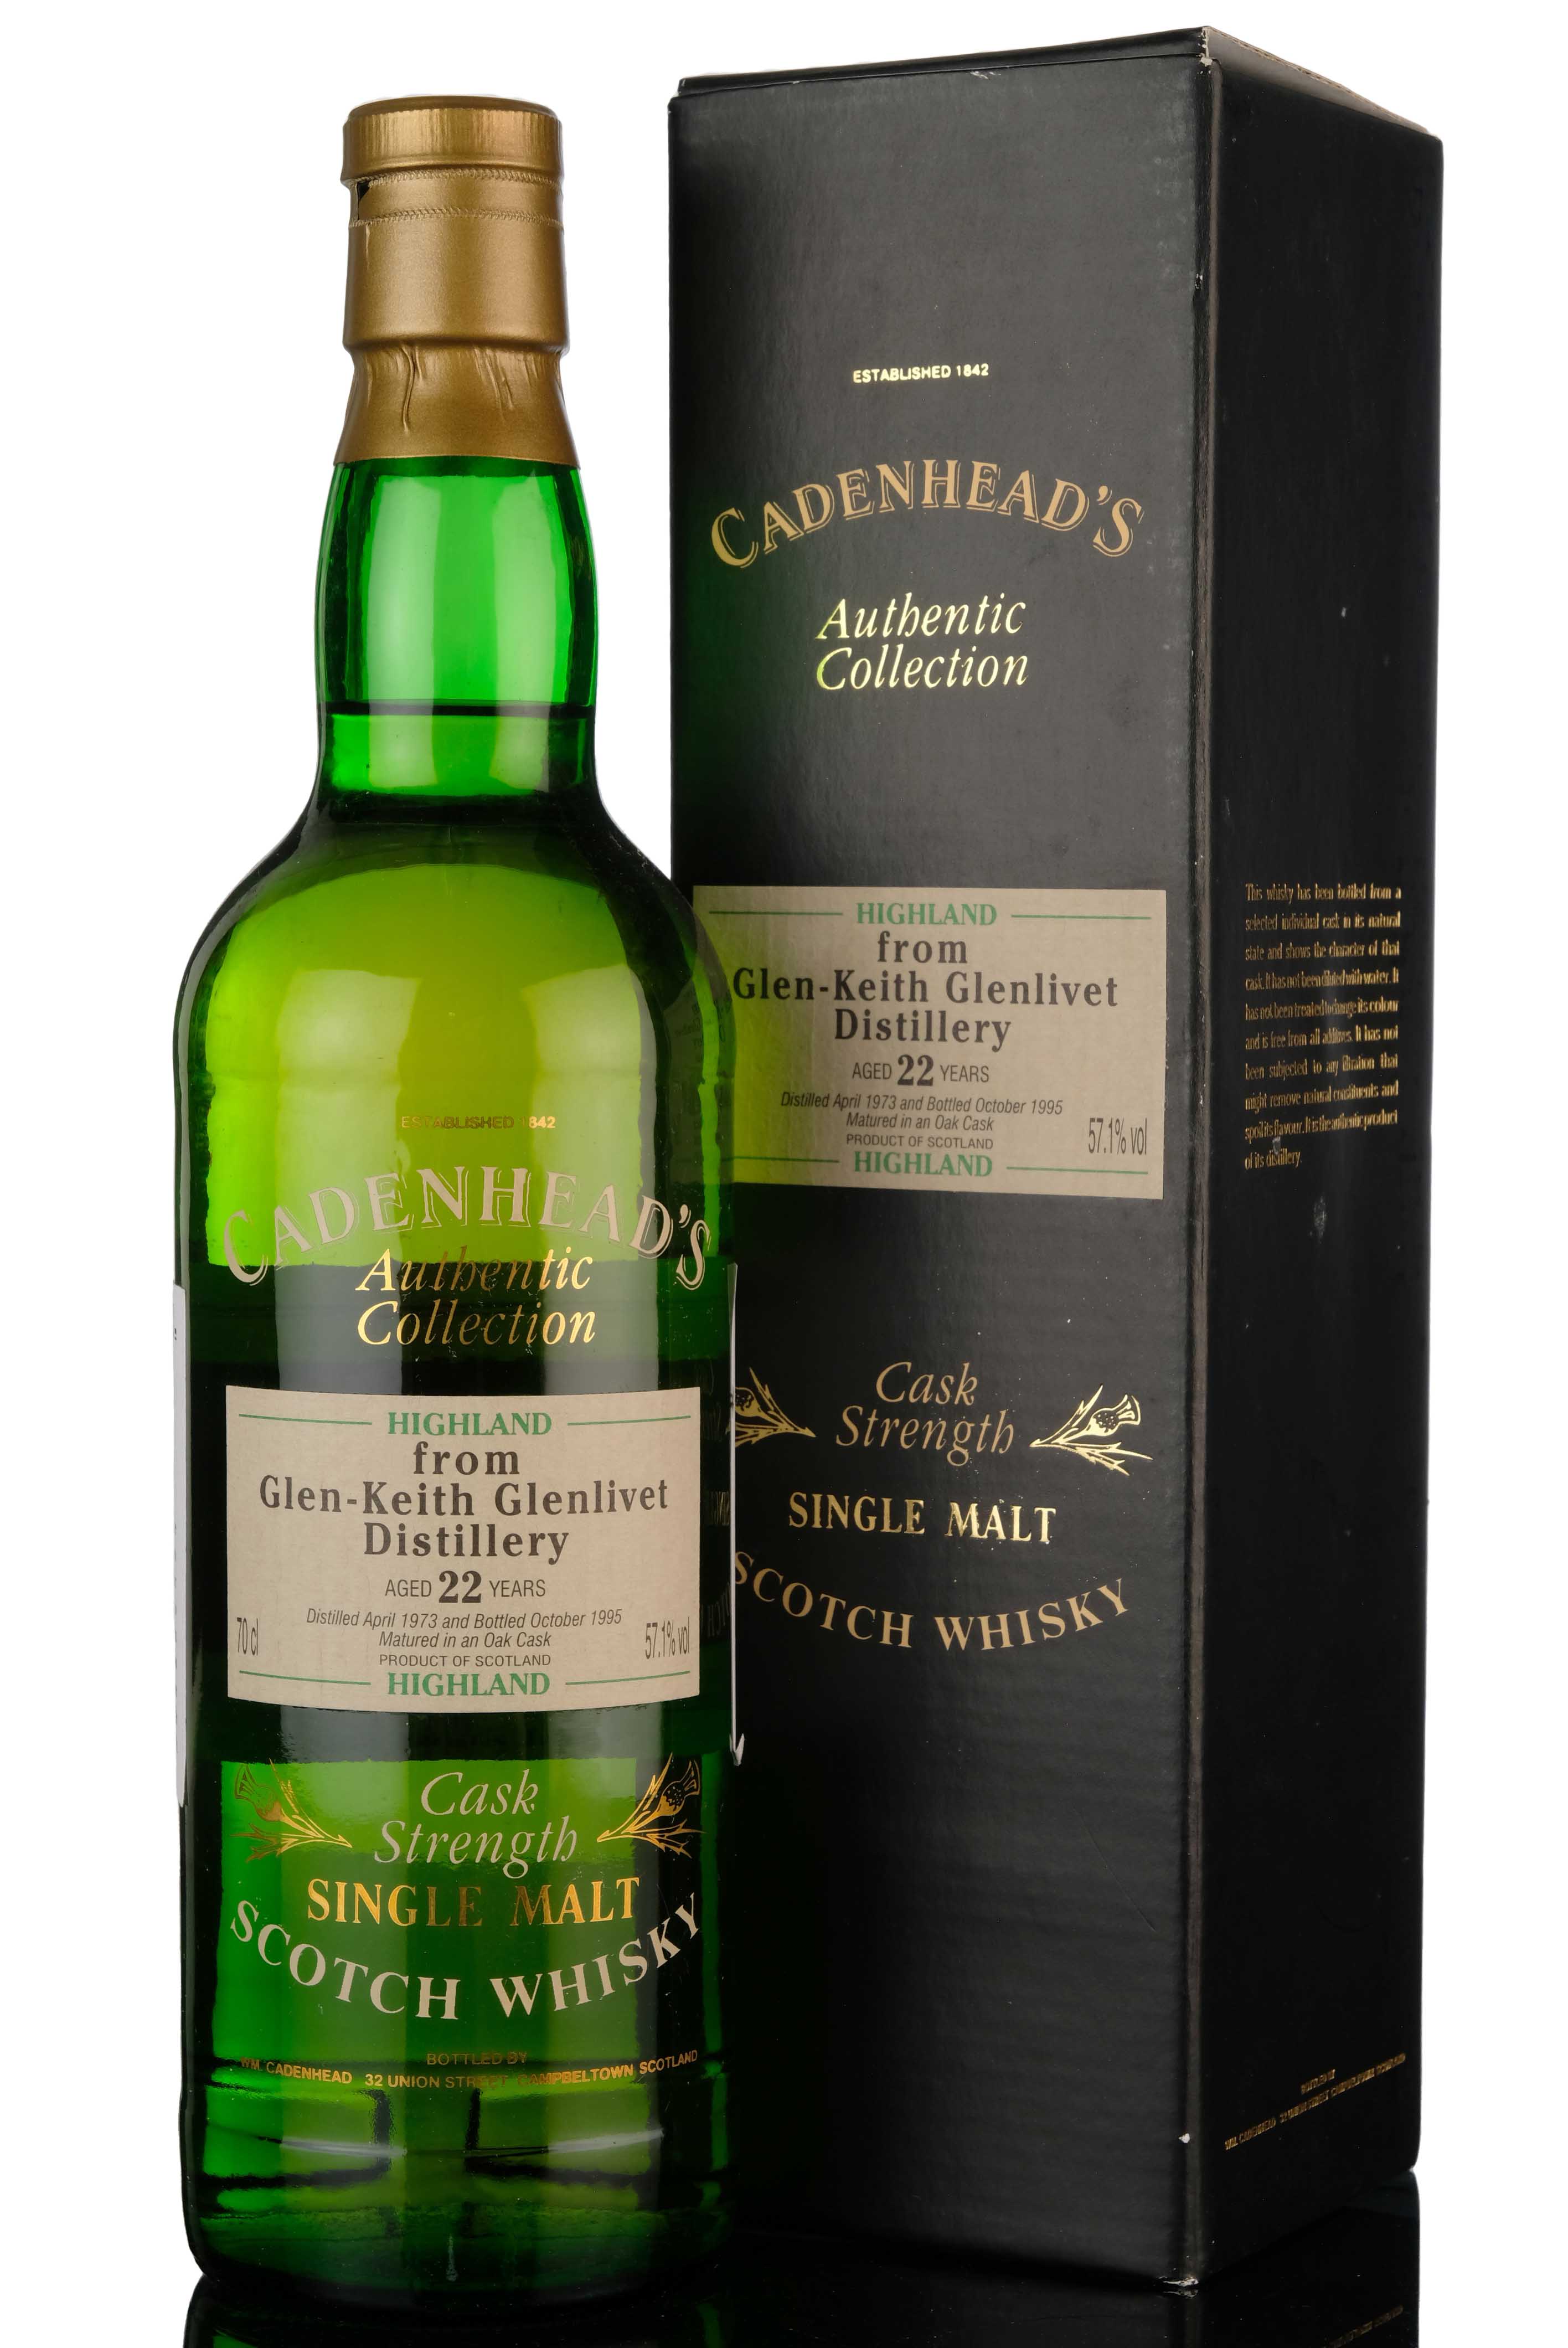 Glen Keith 1973-1995 - 22 Year Old - Cadenheads Authentic Collection